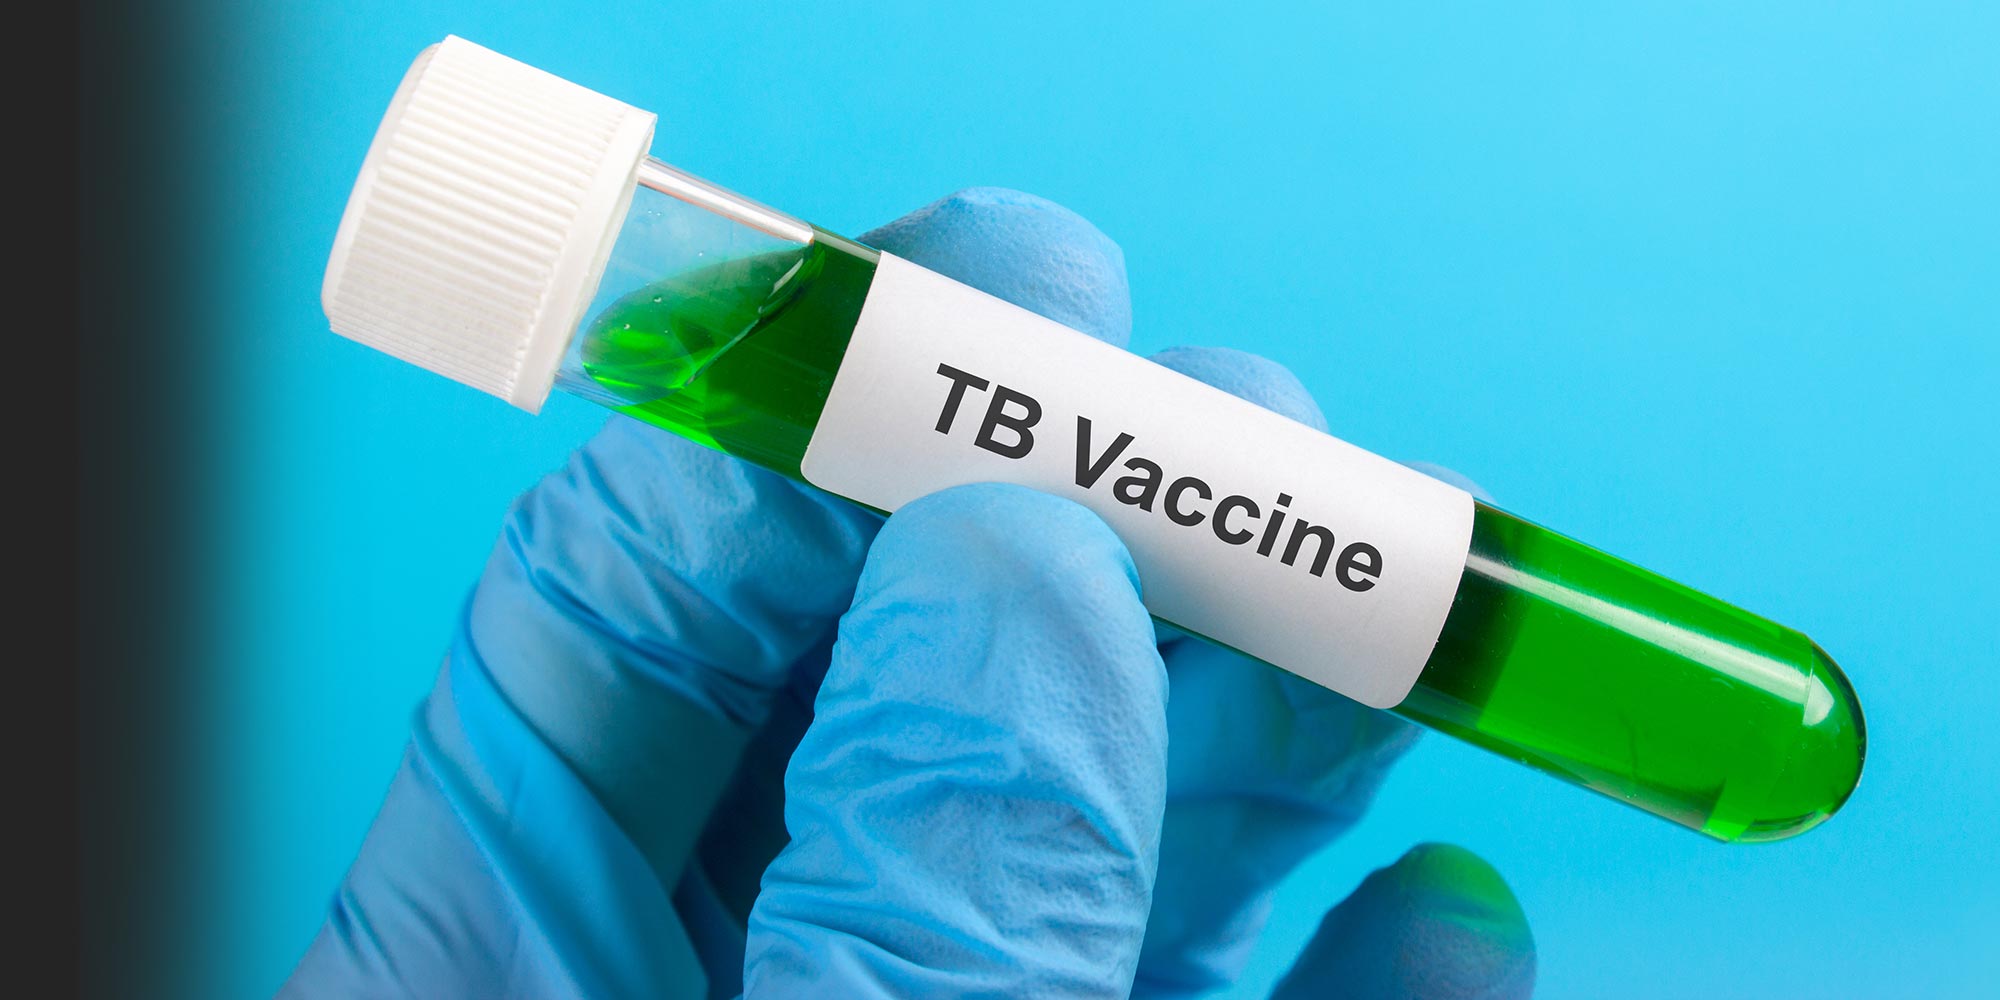 How has TB conquered your body?